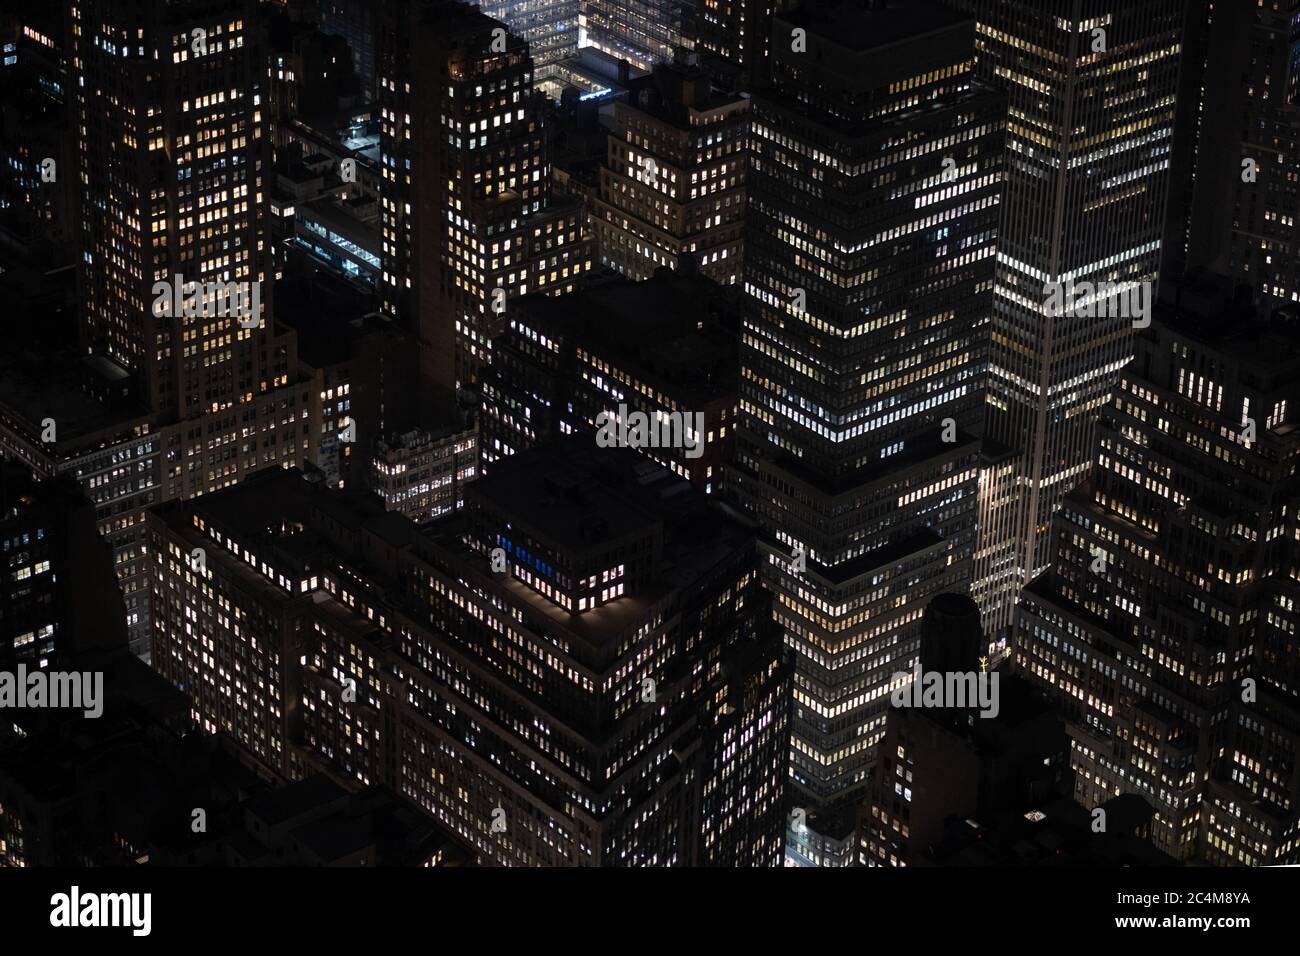 High angle shot of the beautiful lights on the buildings and skyscrapers captured at night Stock Photo